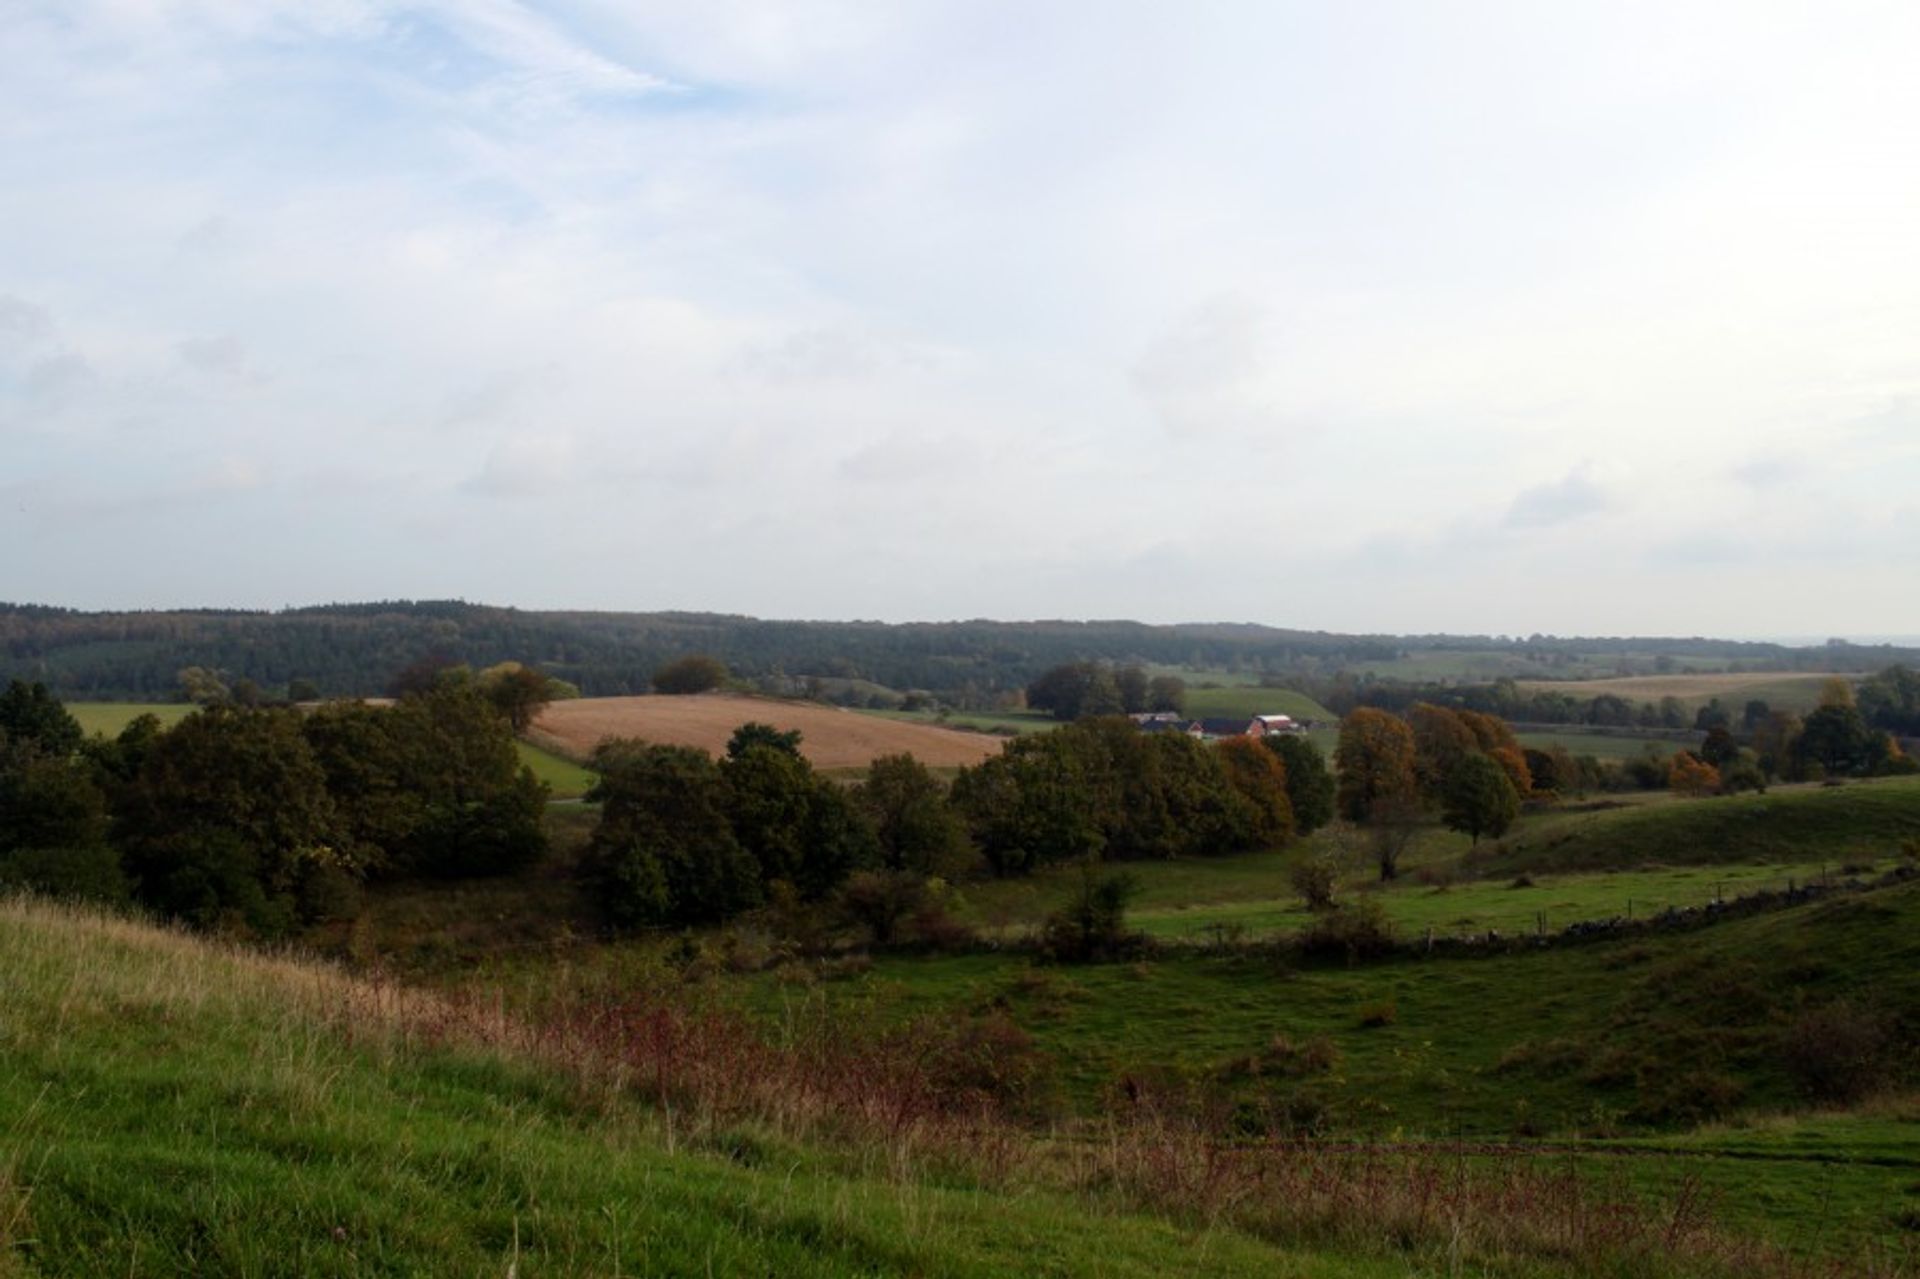 A landscape picture in Brösarps Hills on a meadow where green trees can be seen with orange leaves, and a brown pasture.